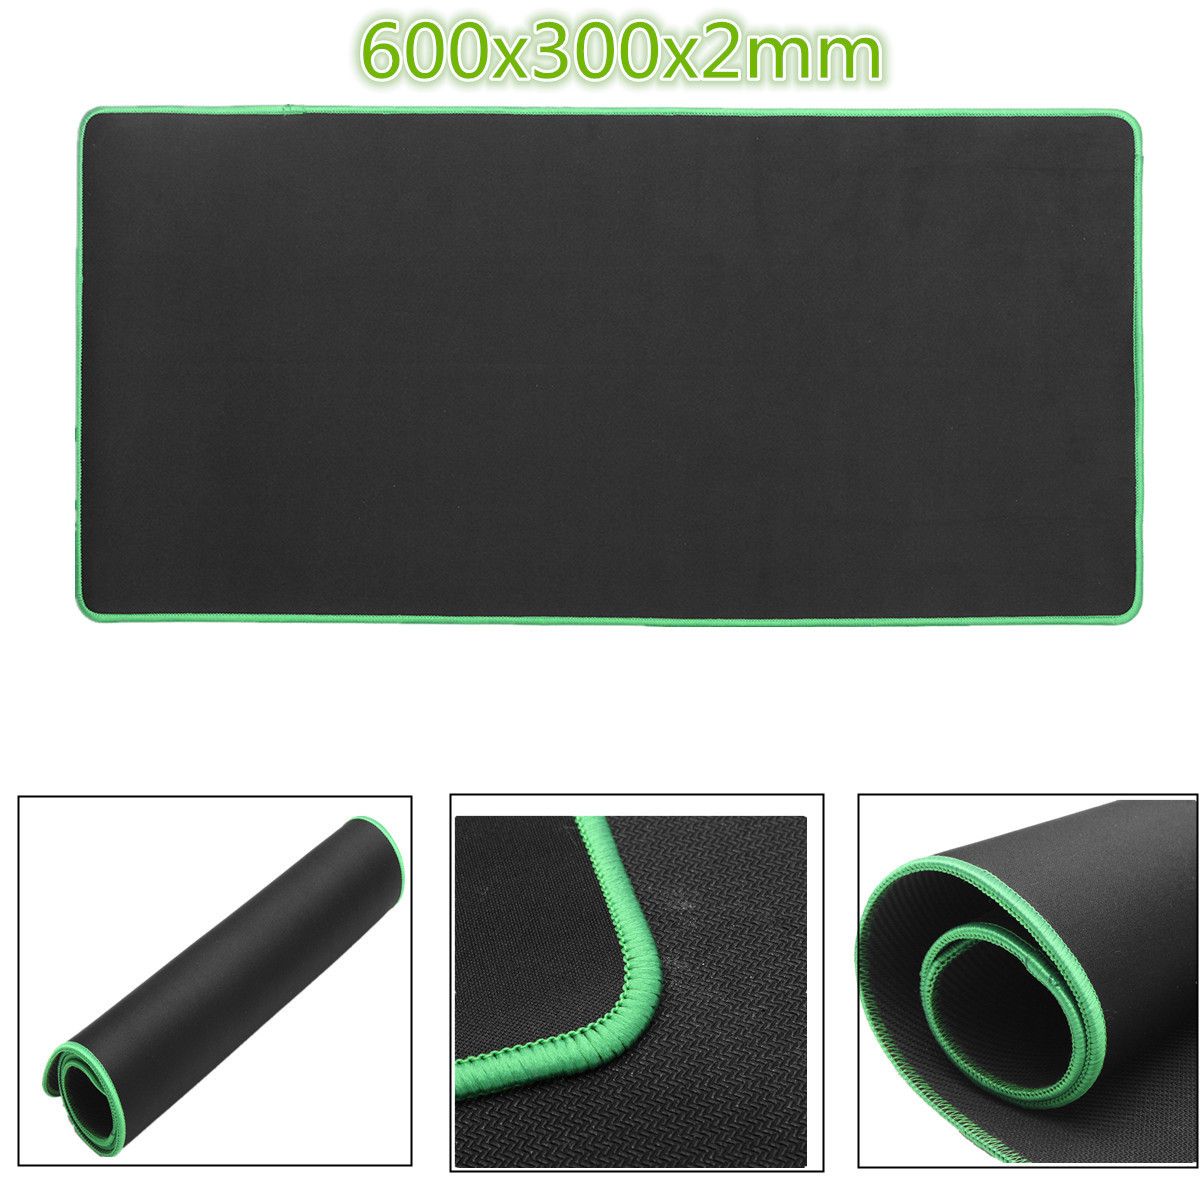 600x300x2mm-Black-Anti-Slip-Natural-Rubber-Cloth-Office-Keyboard-Mouse-Pad-1113241